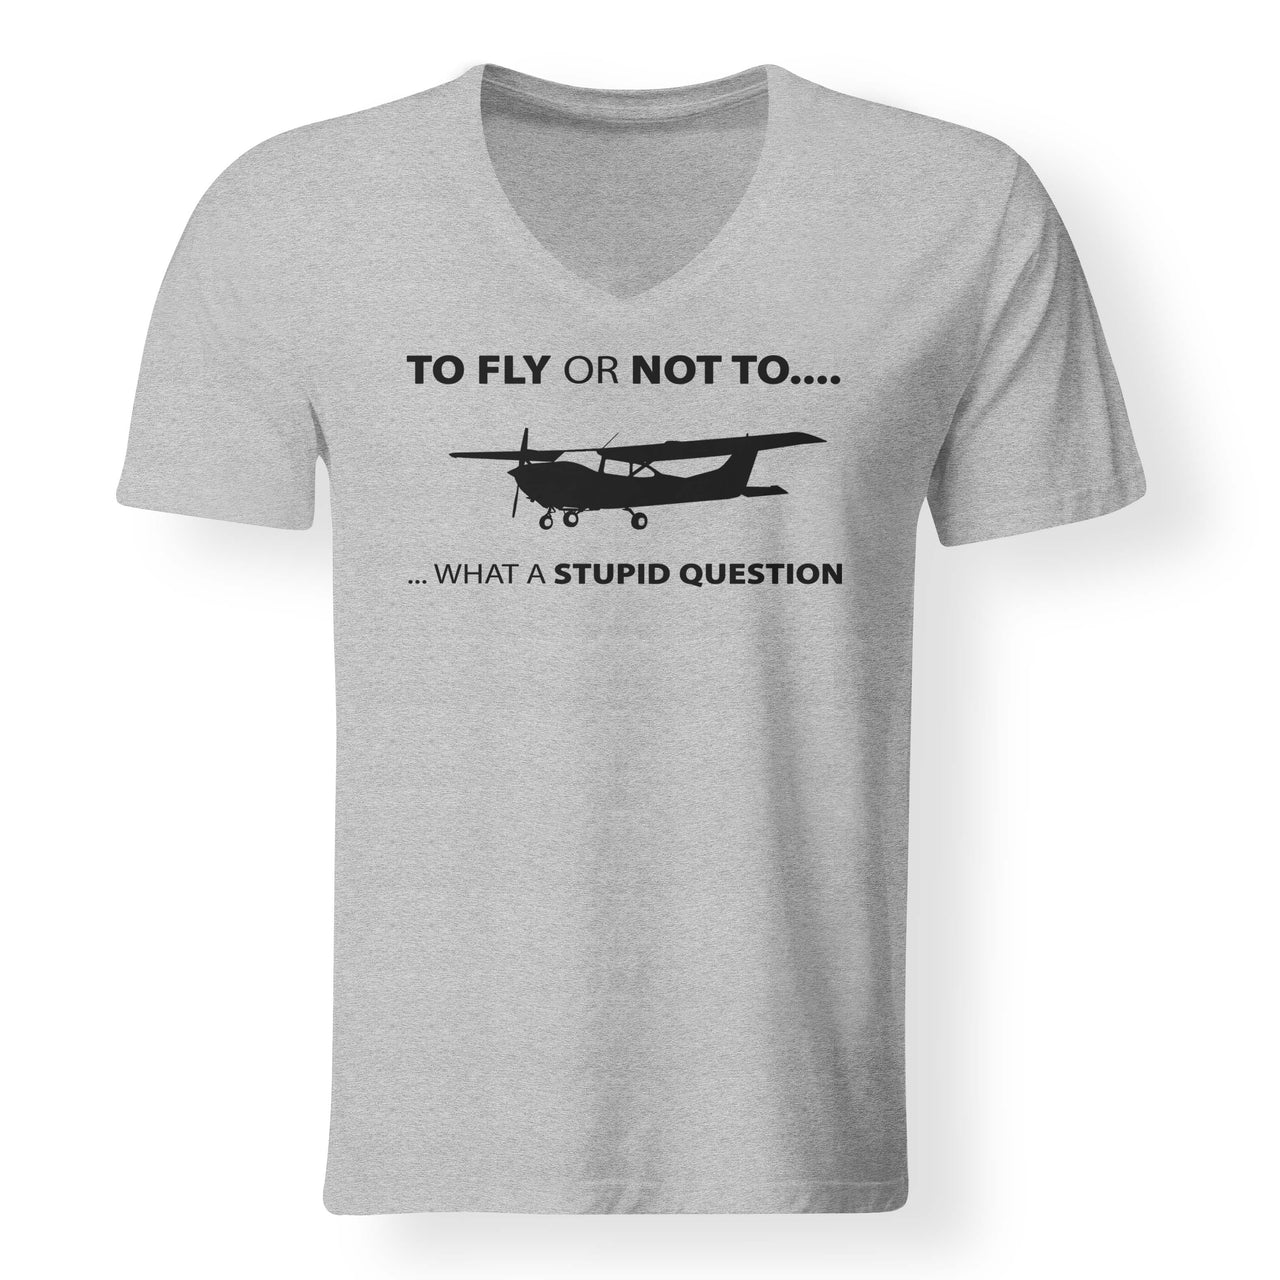 To Fly or Not To What a Stupid Question Designed V-Neck T-Shirts